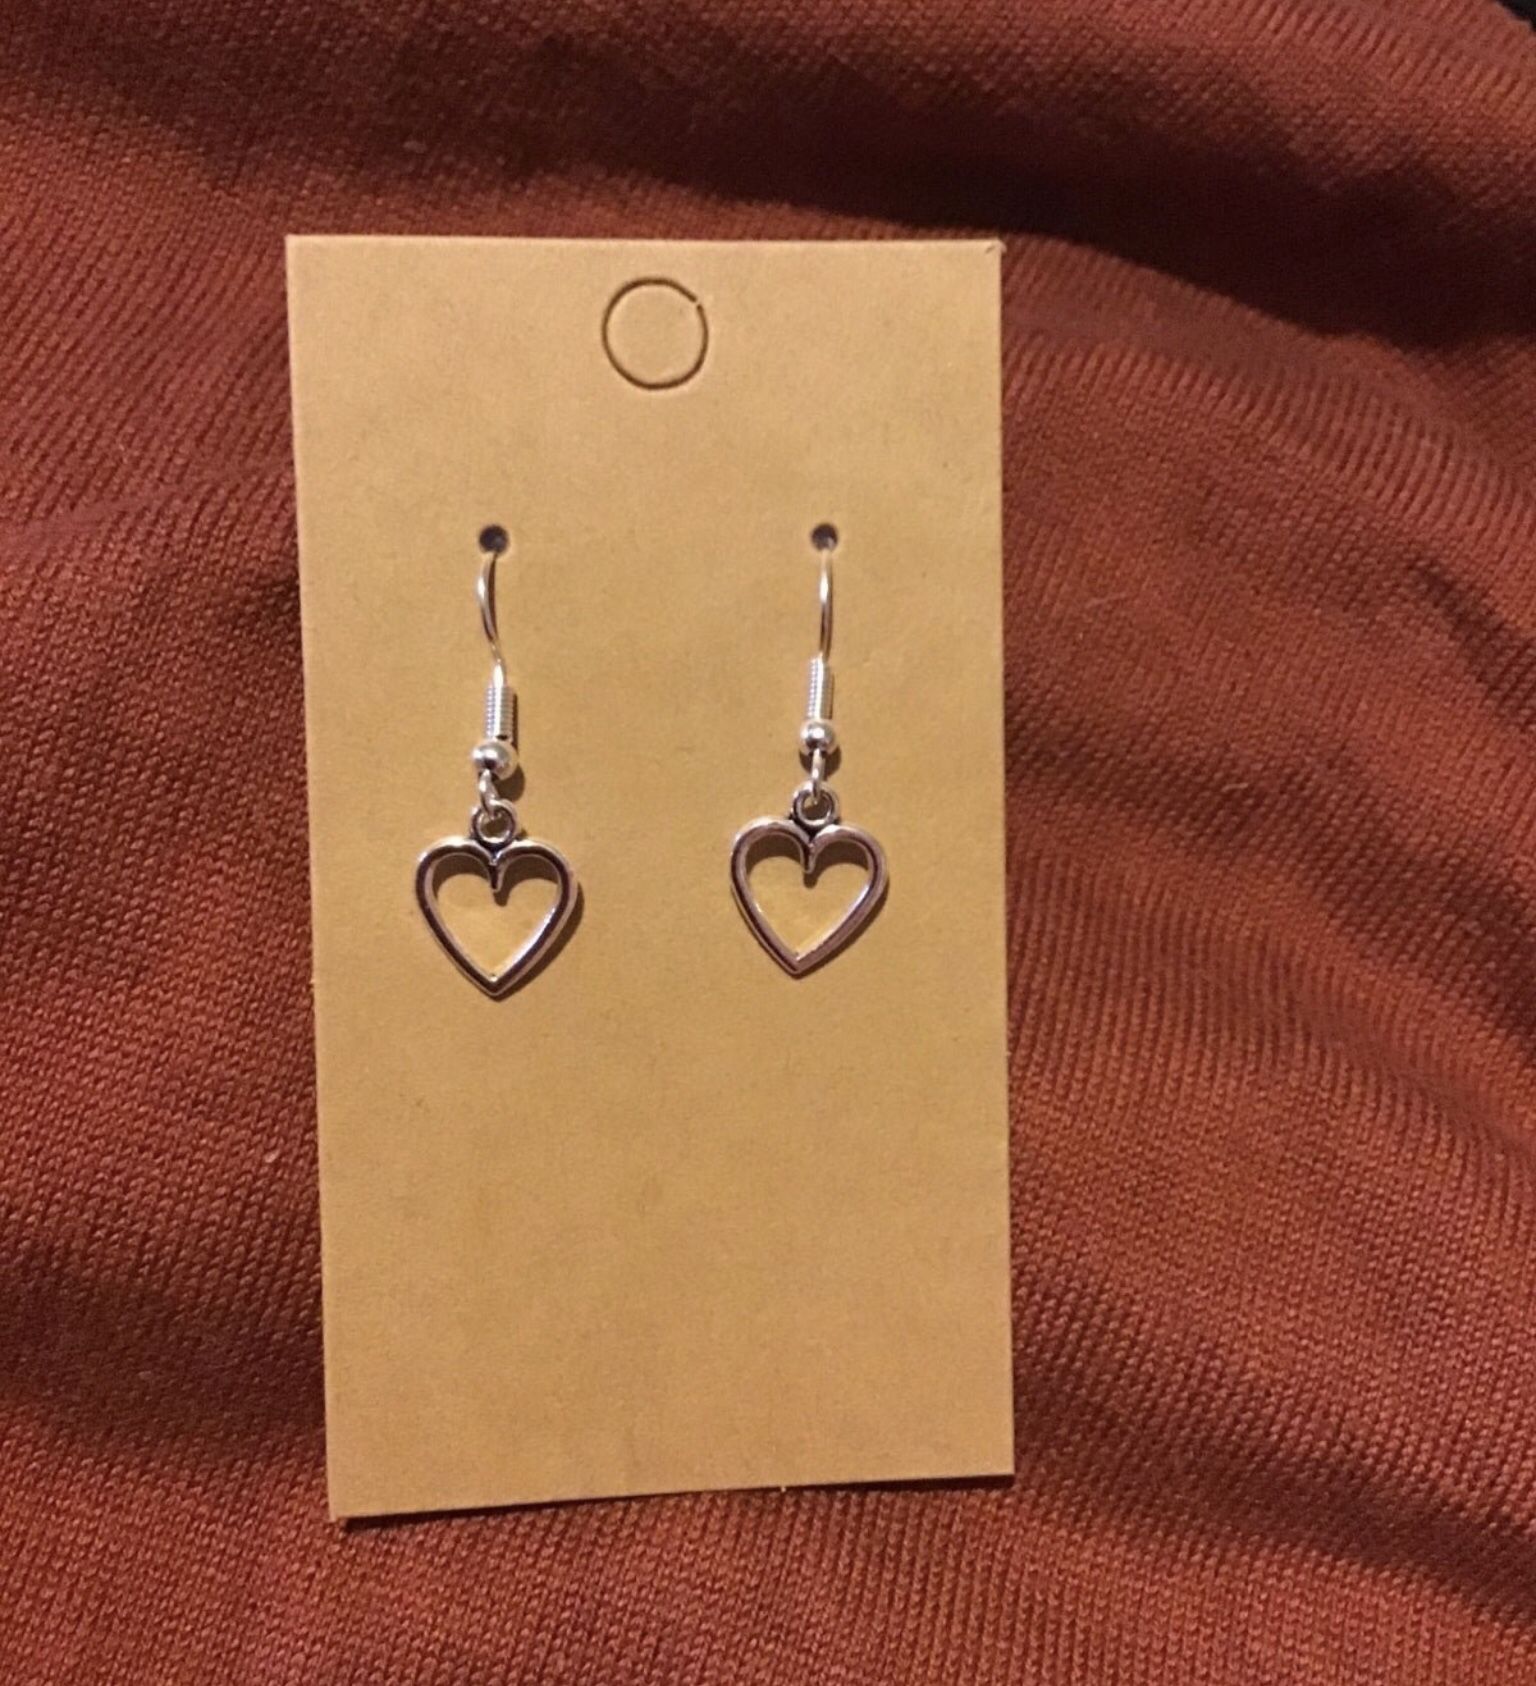 Small Silver Colored Heart Earrings 